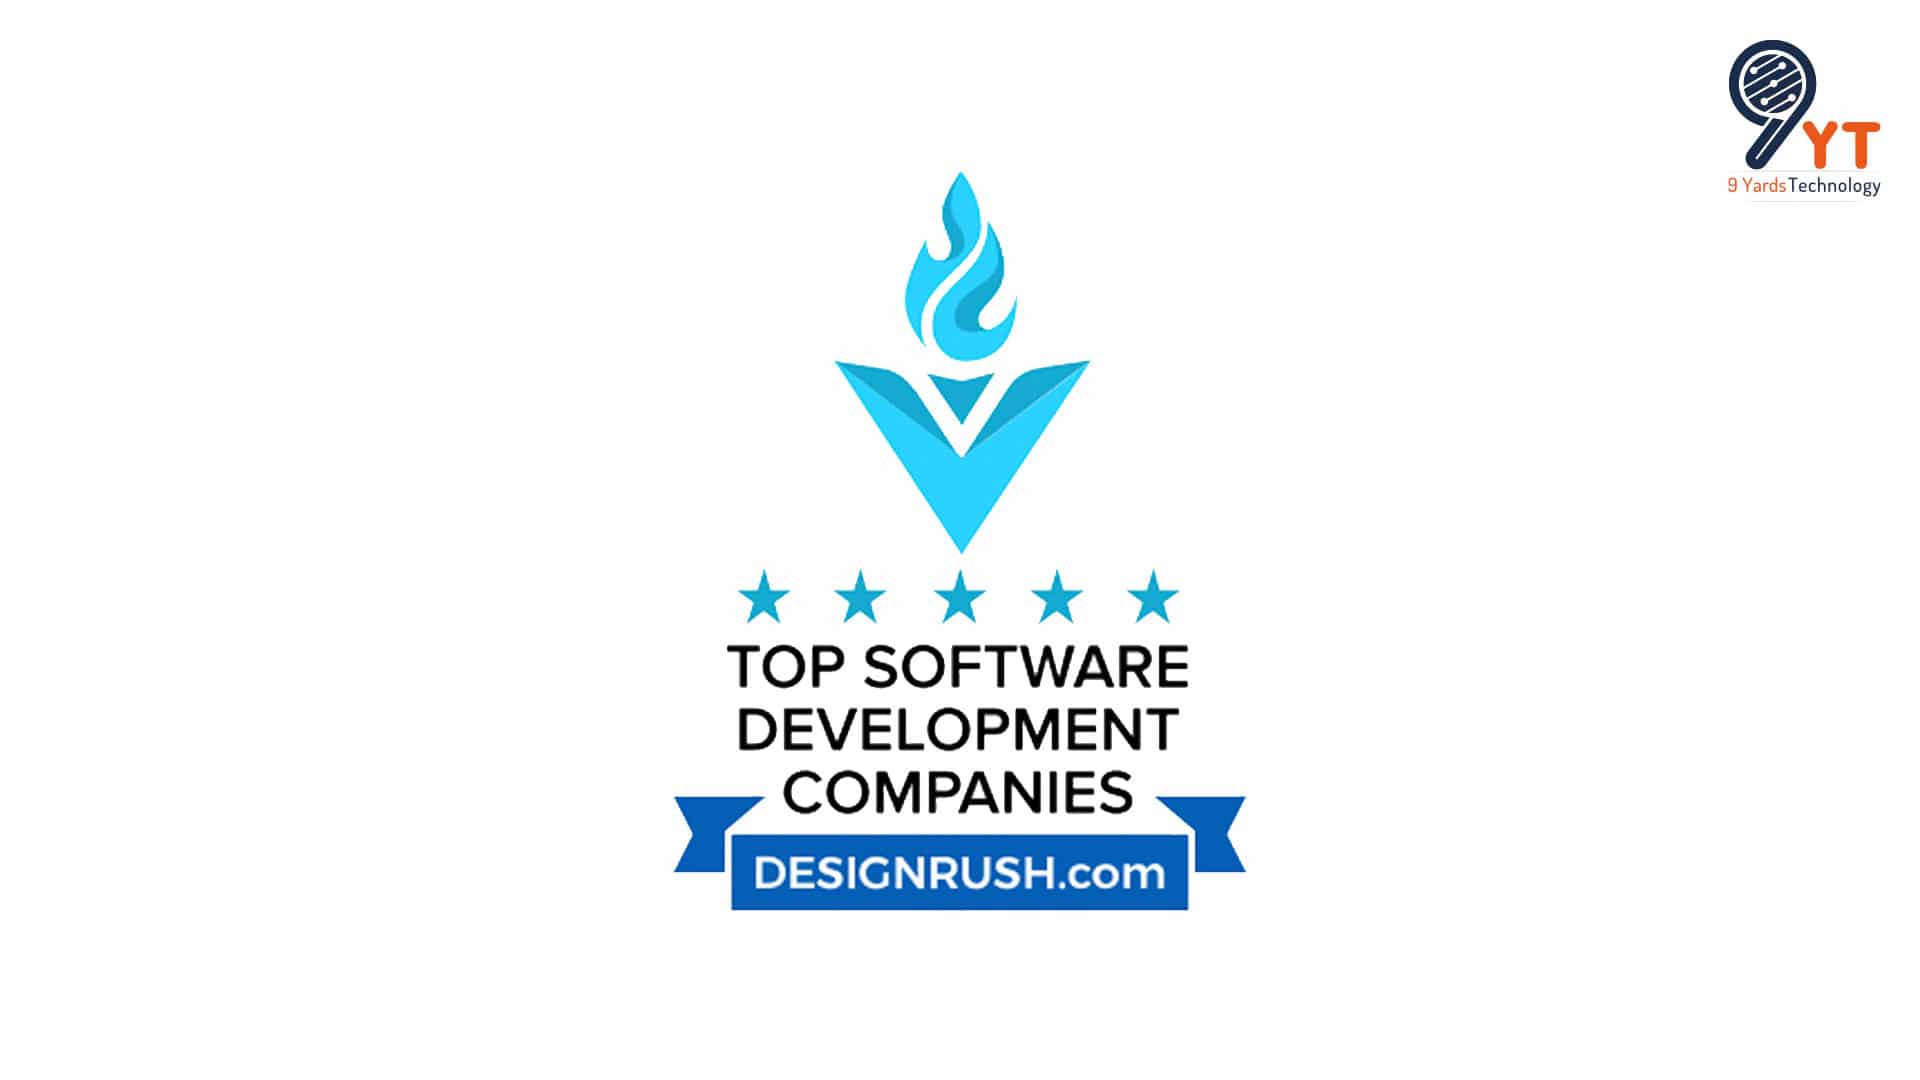 9 Yards Technology Honored as Top 20 Software Testing Company By DesignRush!